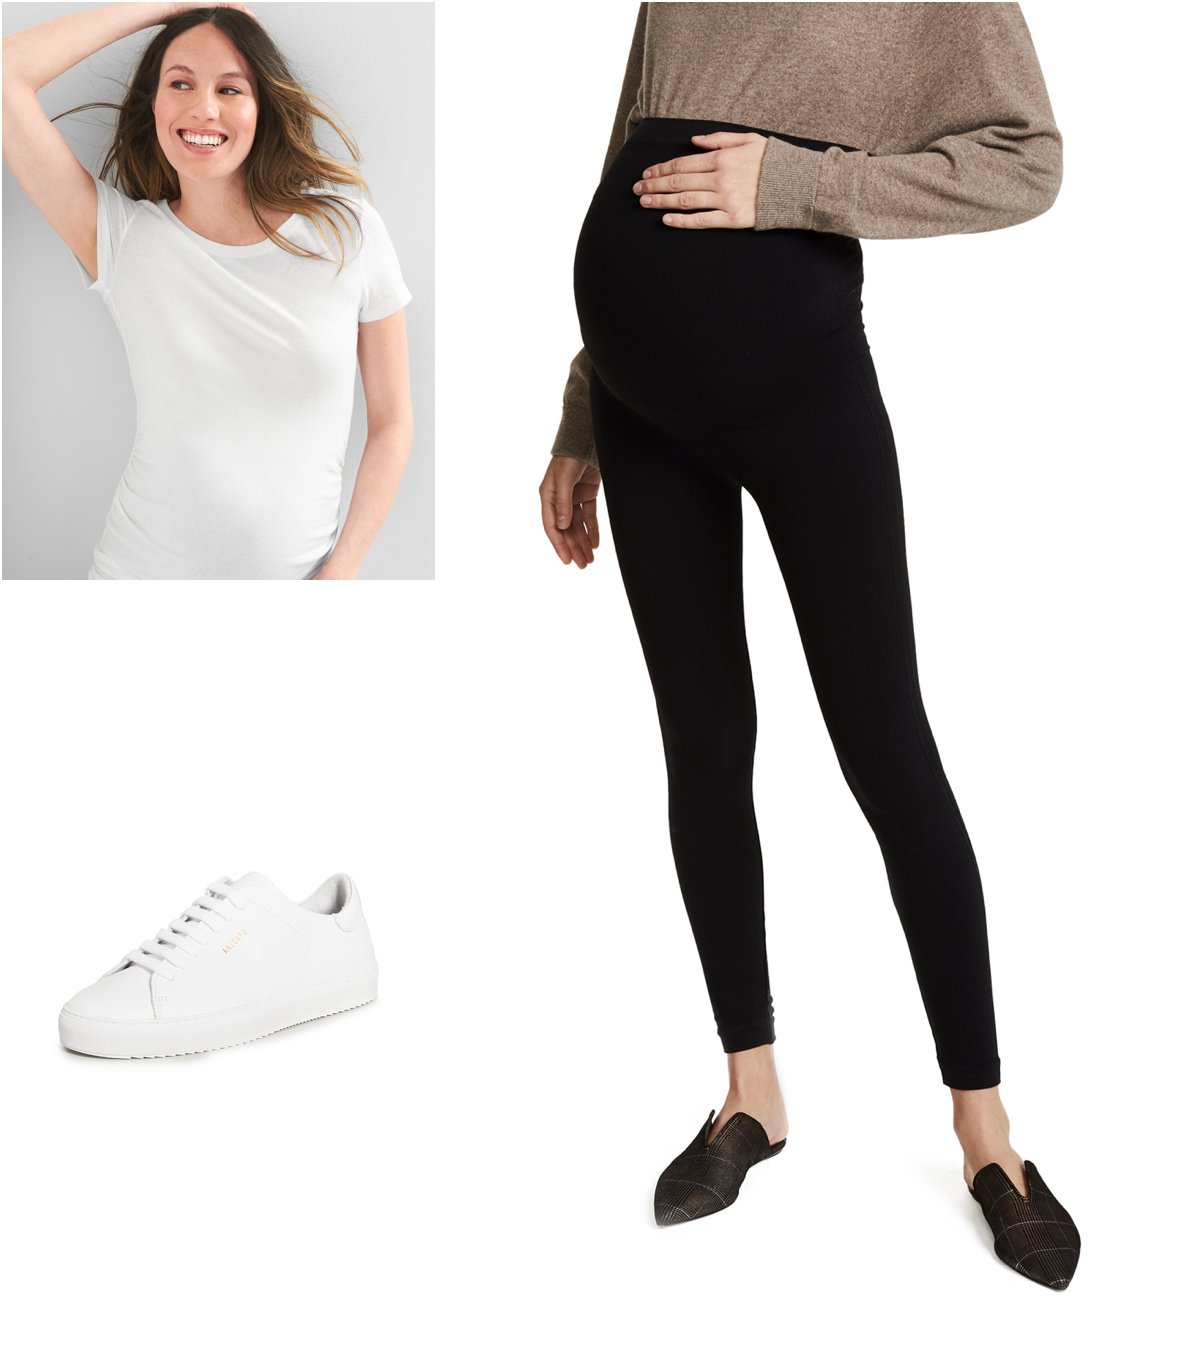 4 Different Looks Using The Same Maternity Tee, Leggings